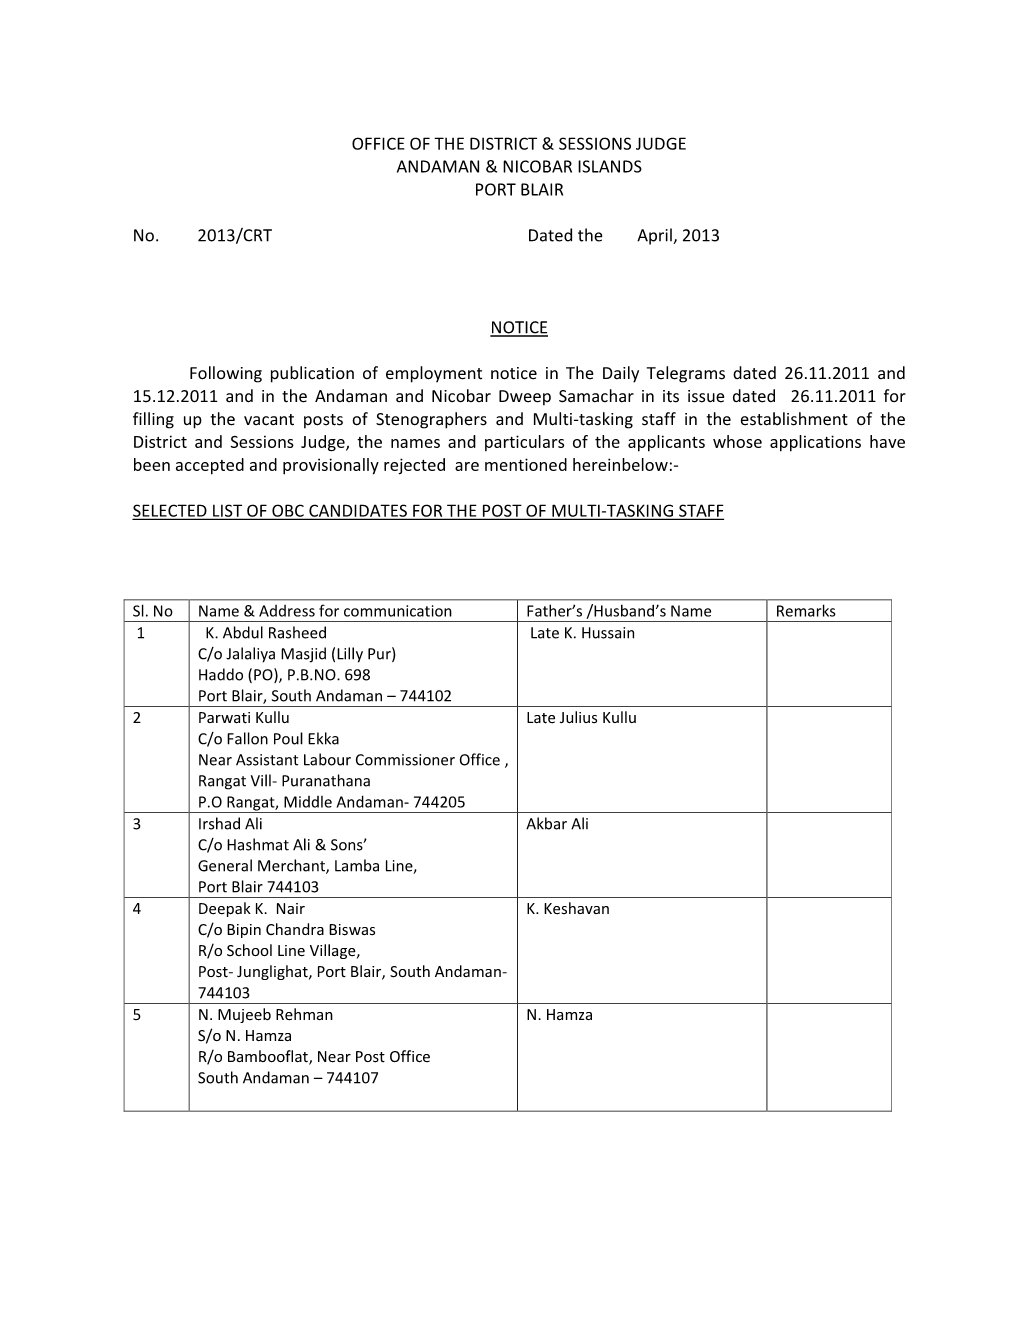 OFFICE of the DISTRICT & SESSIONS JUDGE ANDAMAN & NICOBAR ISLANDS PORT BLAIR No. 2013/CRT Dated the April, 2013